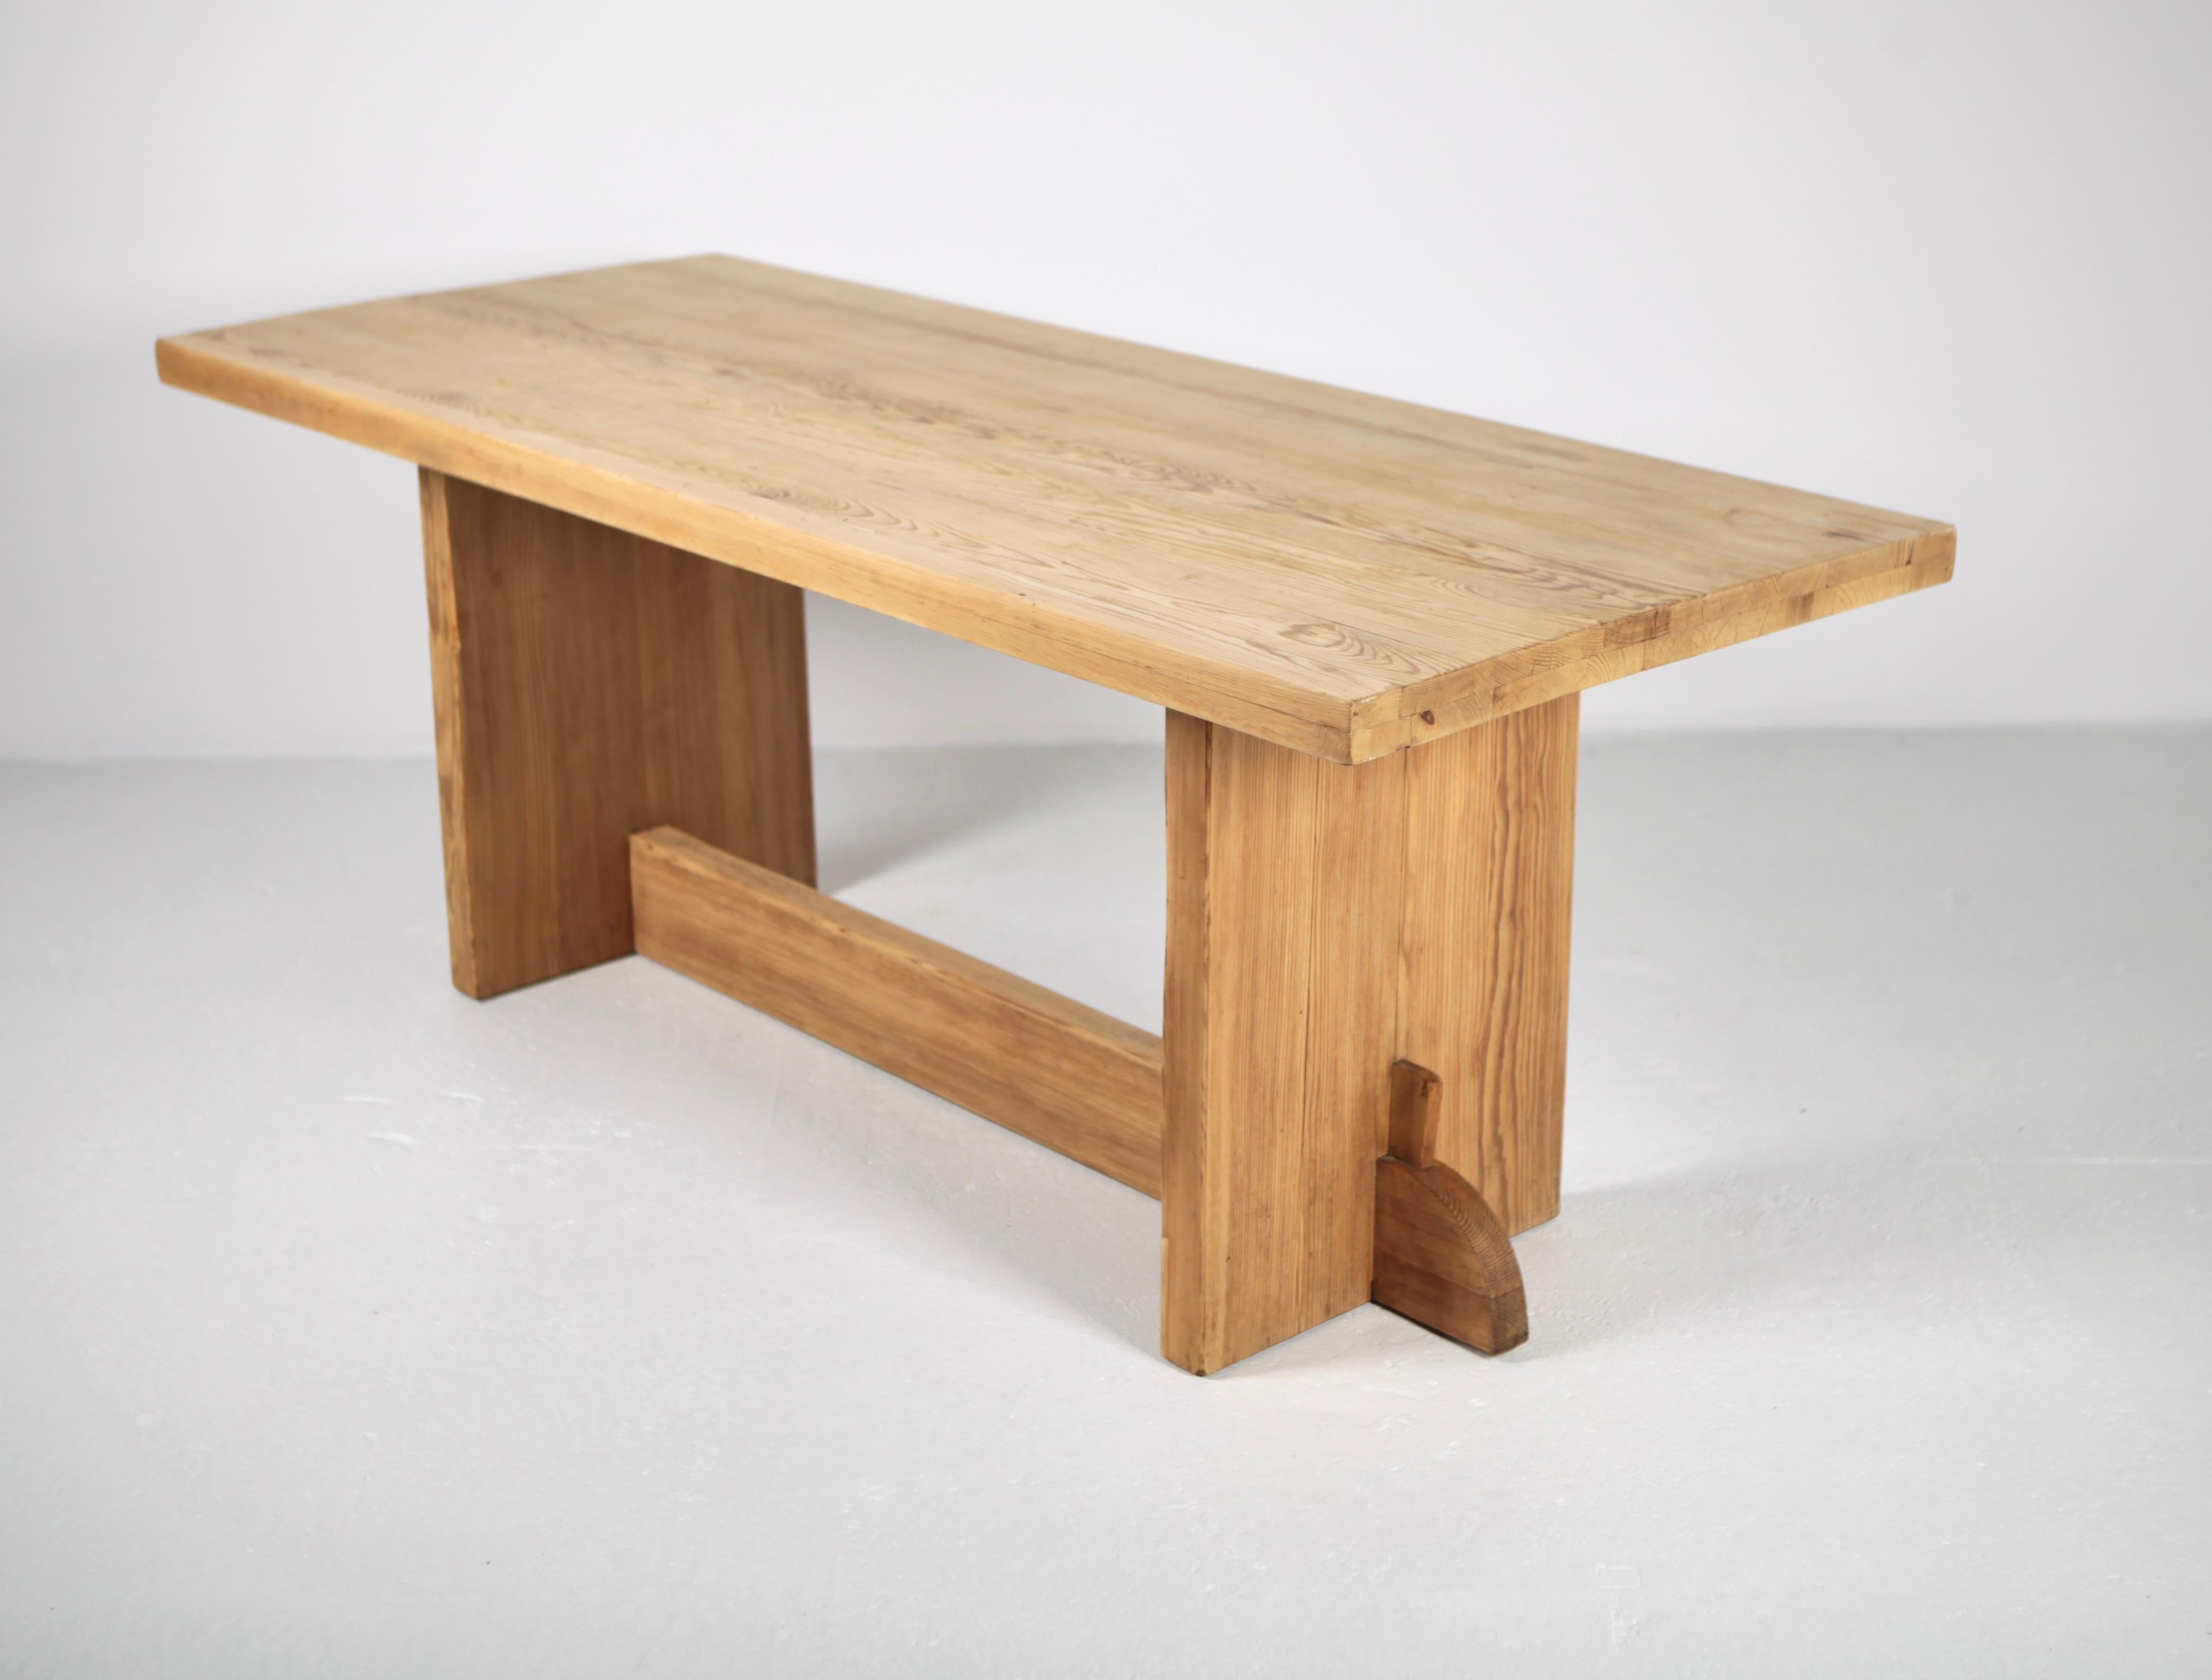 Pine 'Lovö' table by Swedish Modernist Axel-Einar Hjorth, manufactured by Nordiska Kompaniet in Sweden, circa 1932.
Best known for his modern reduced design, this table by Axel-Einar Hjorth is one of his timeless masterpieces.
Original vintage